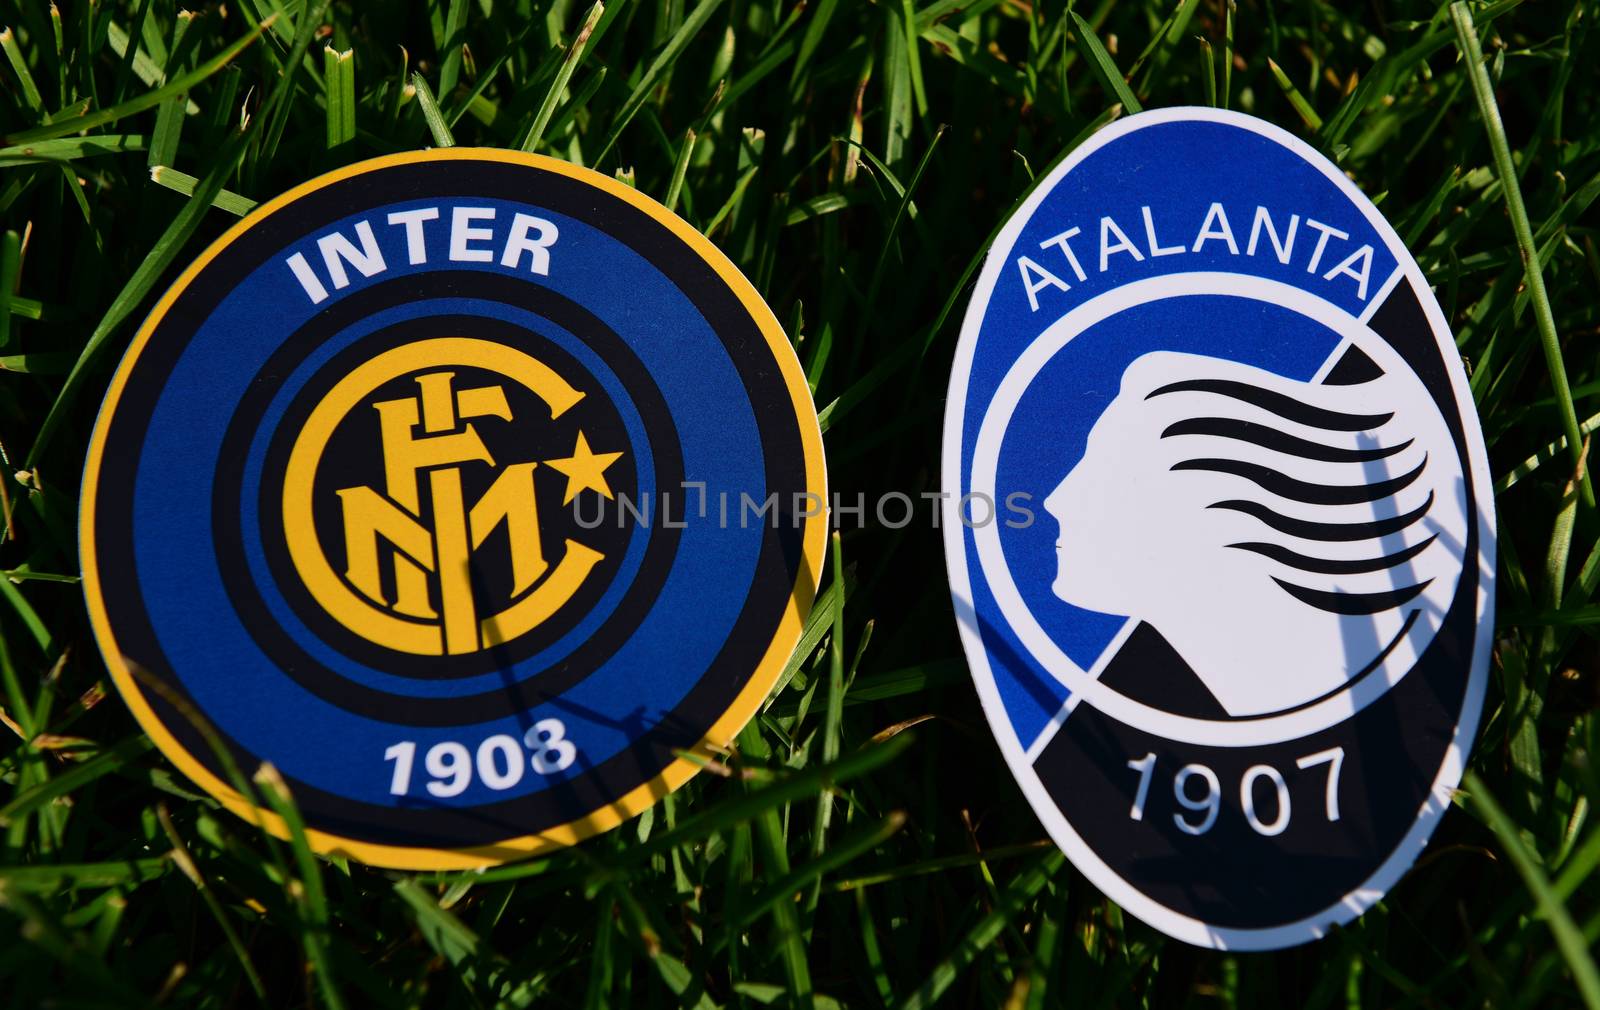 Emblems of European football clubs by fifg